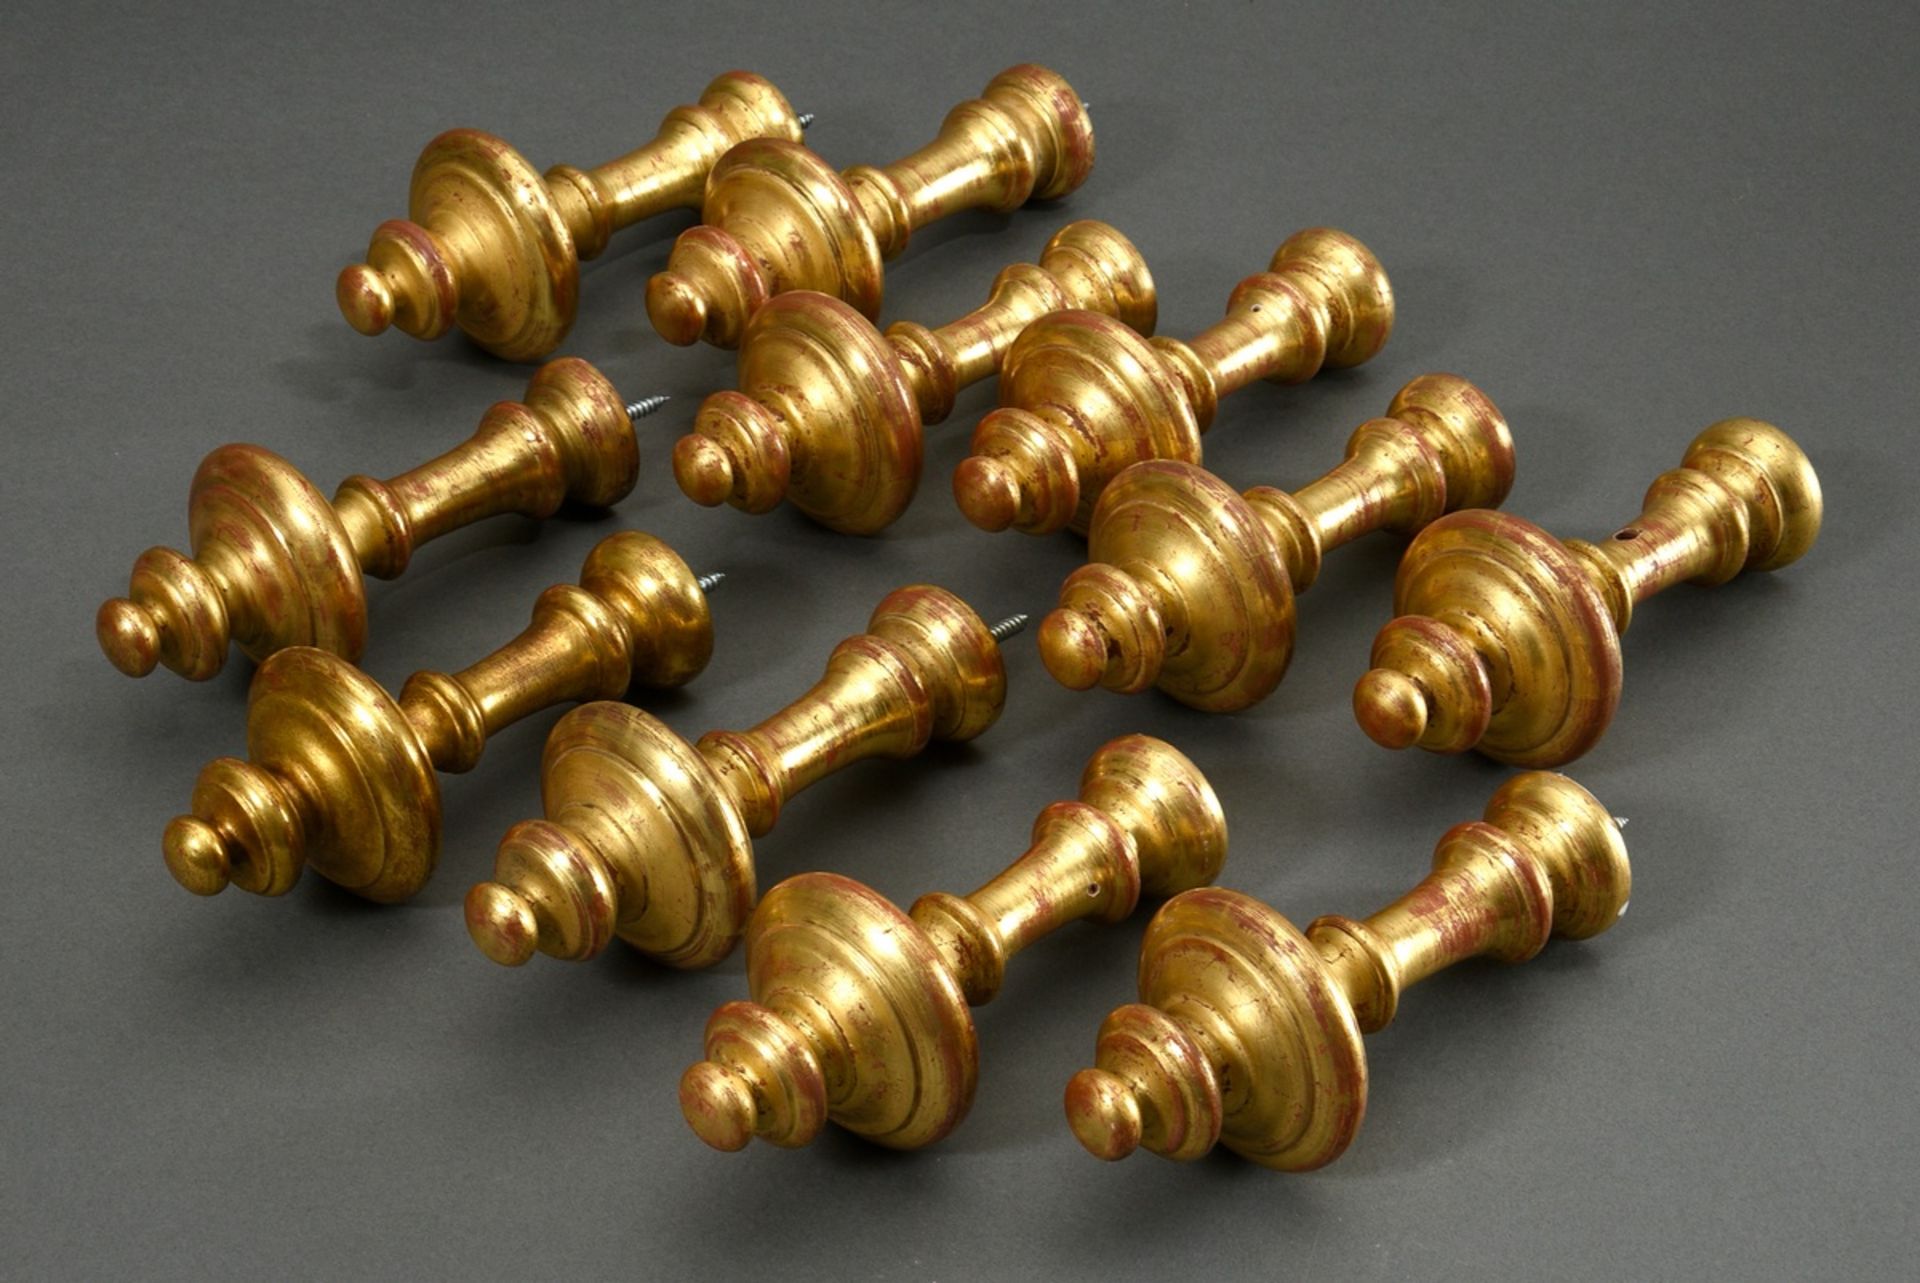 11 Turned curtain holders in baluster form for 5 windows, wood gilded over bolus ground, l. 20cm, t - Image 2 of 3